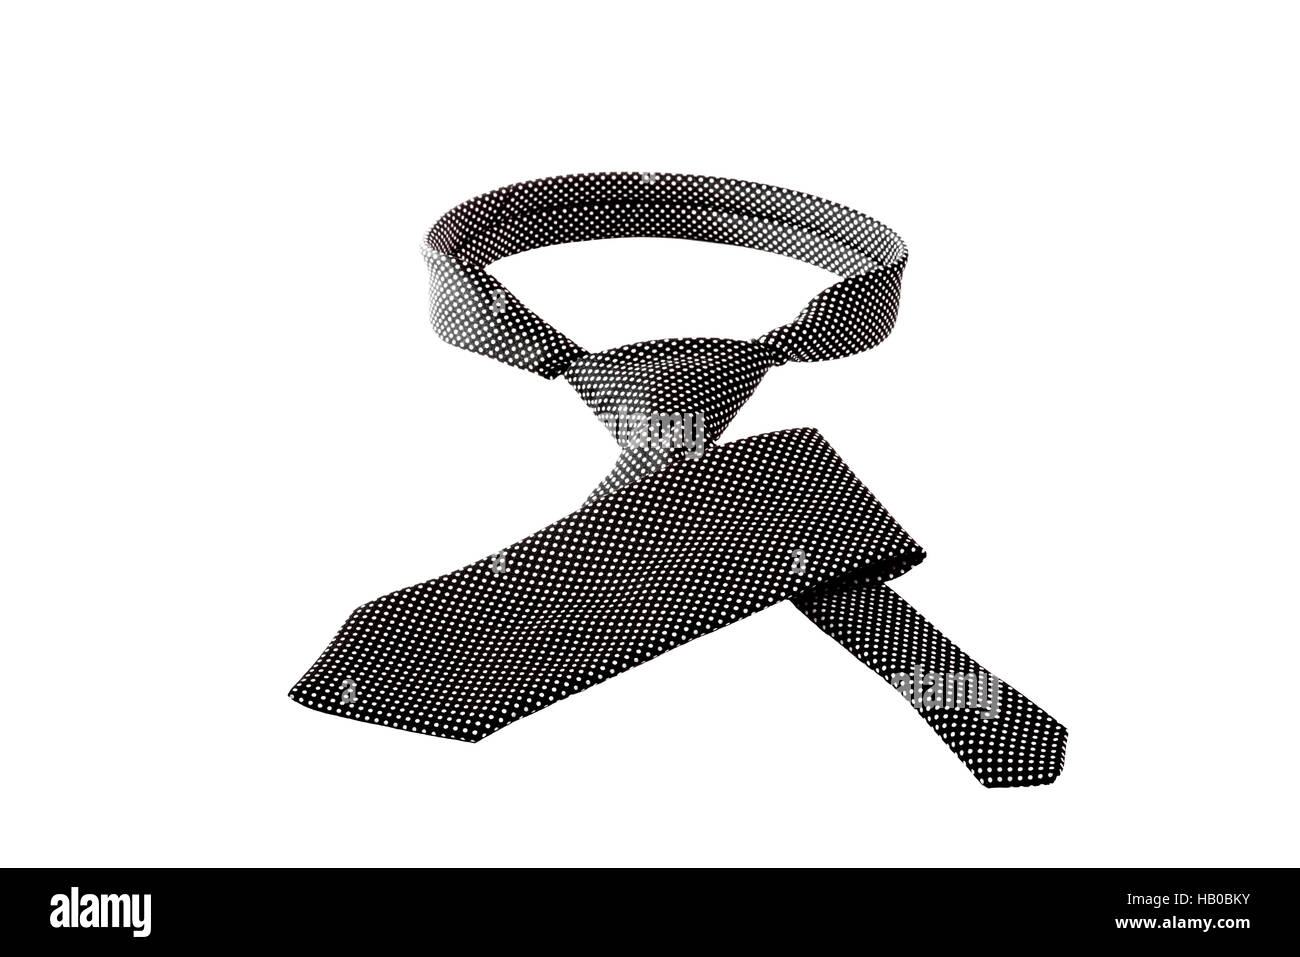 Black tie with white dots Stock Photo